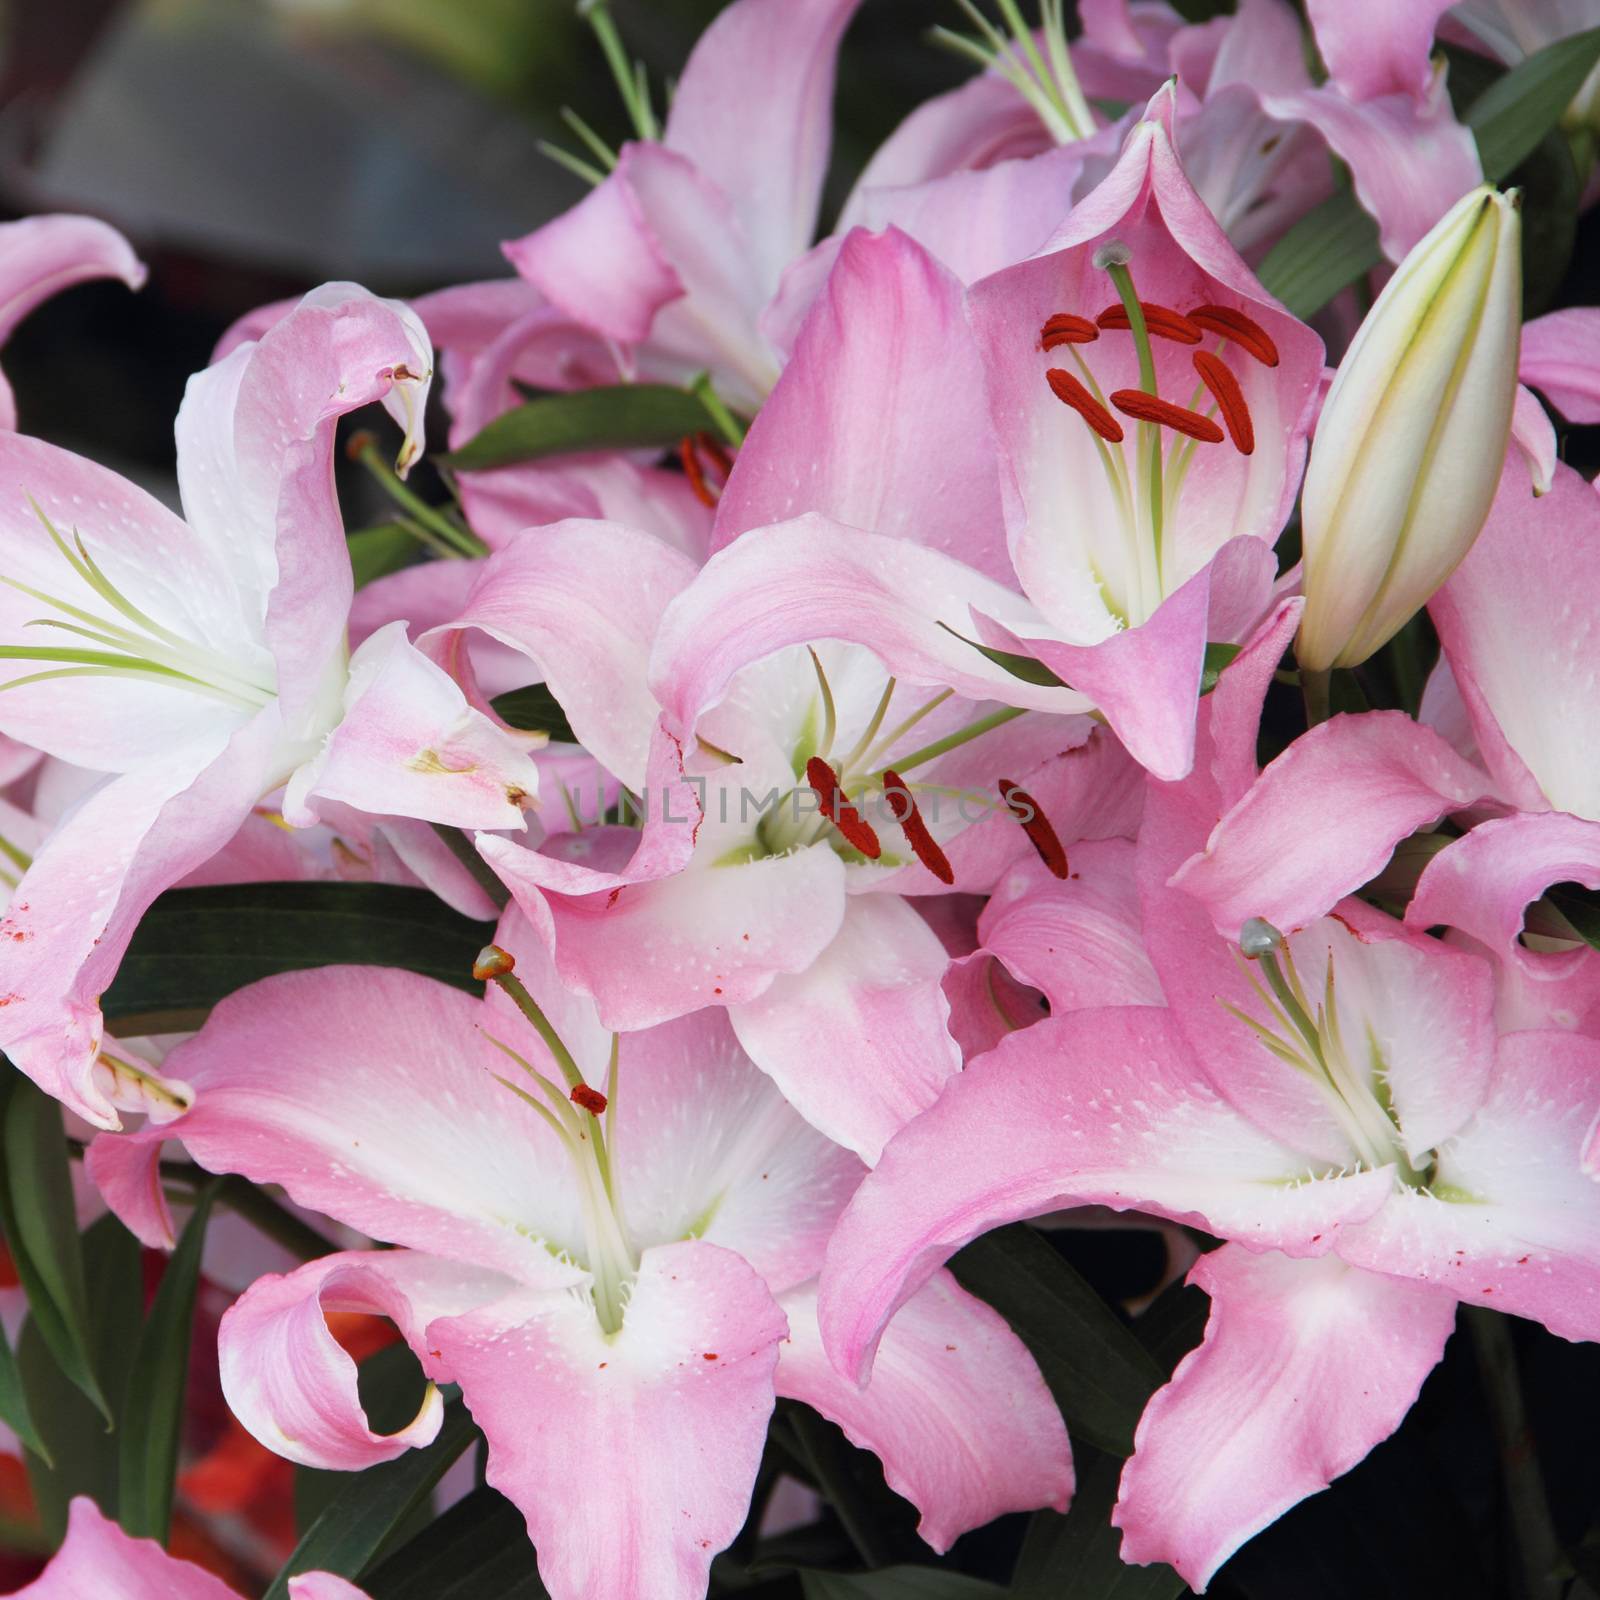 Pink lily flower bouquet background close up